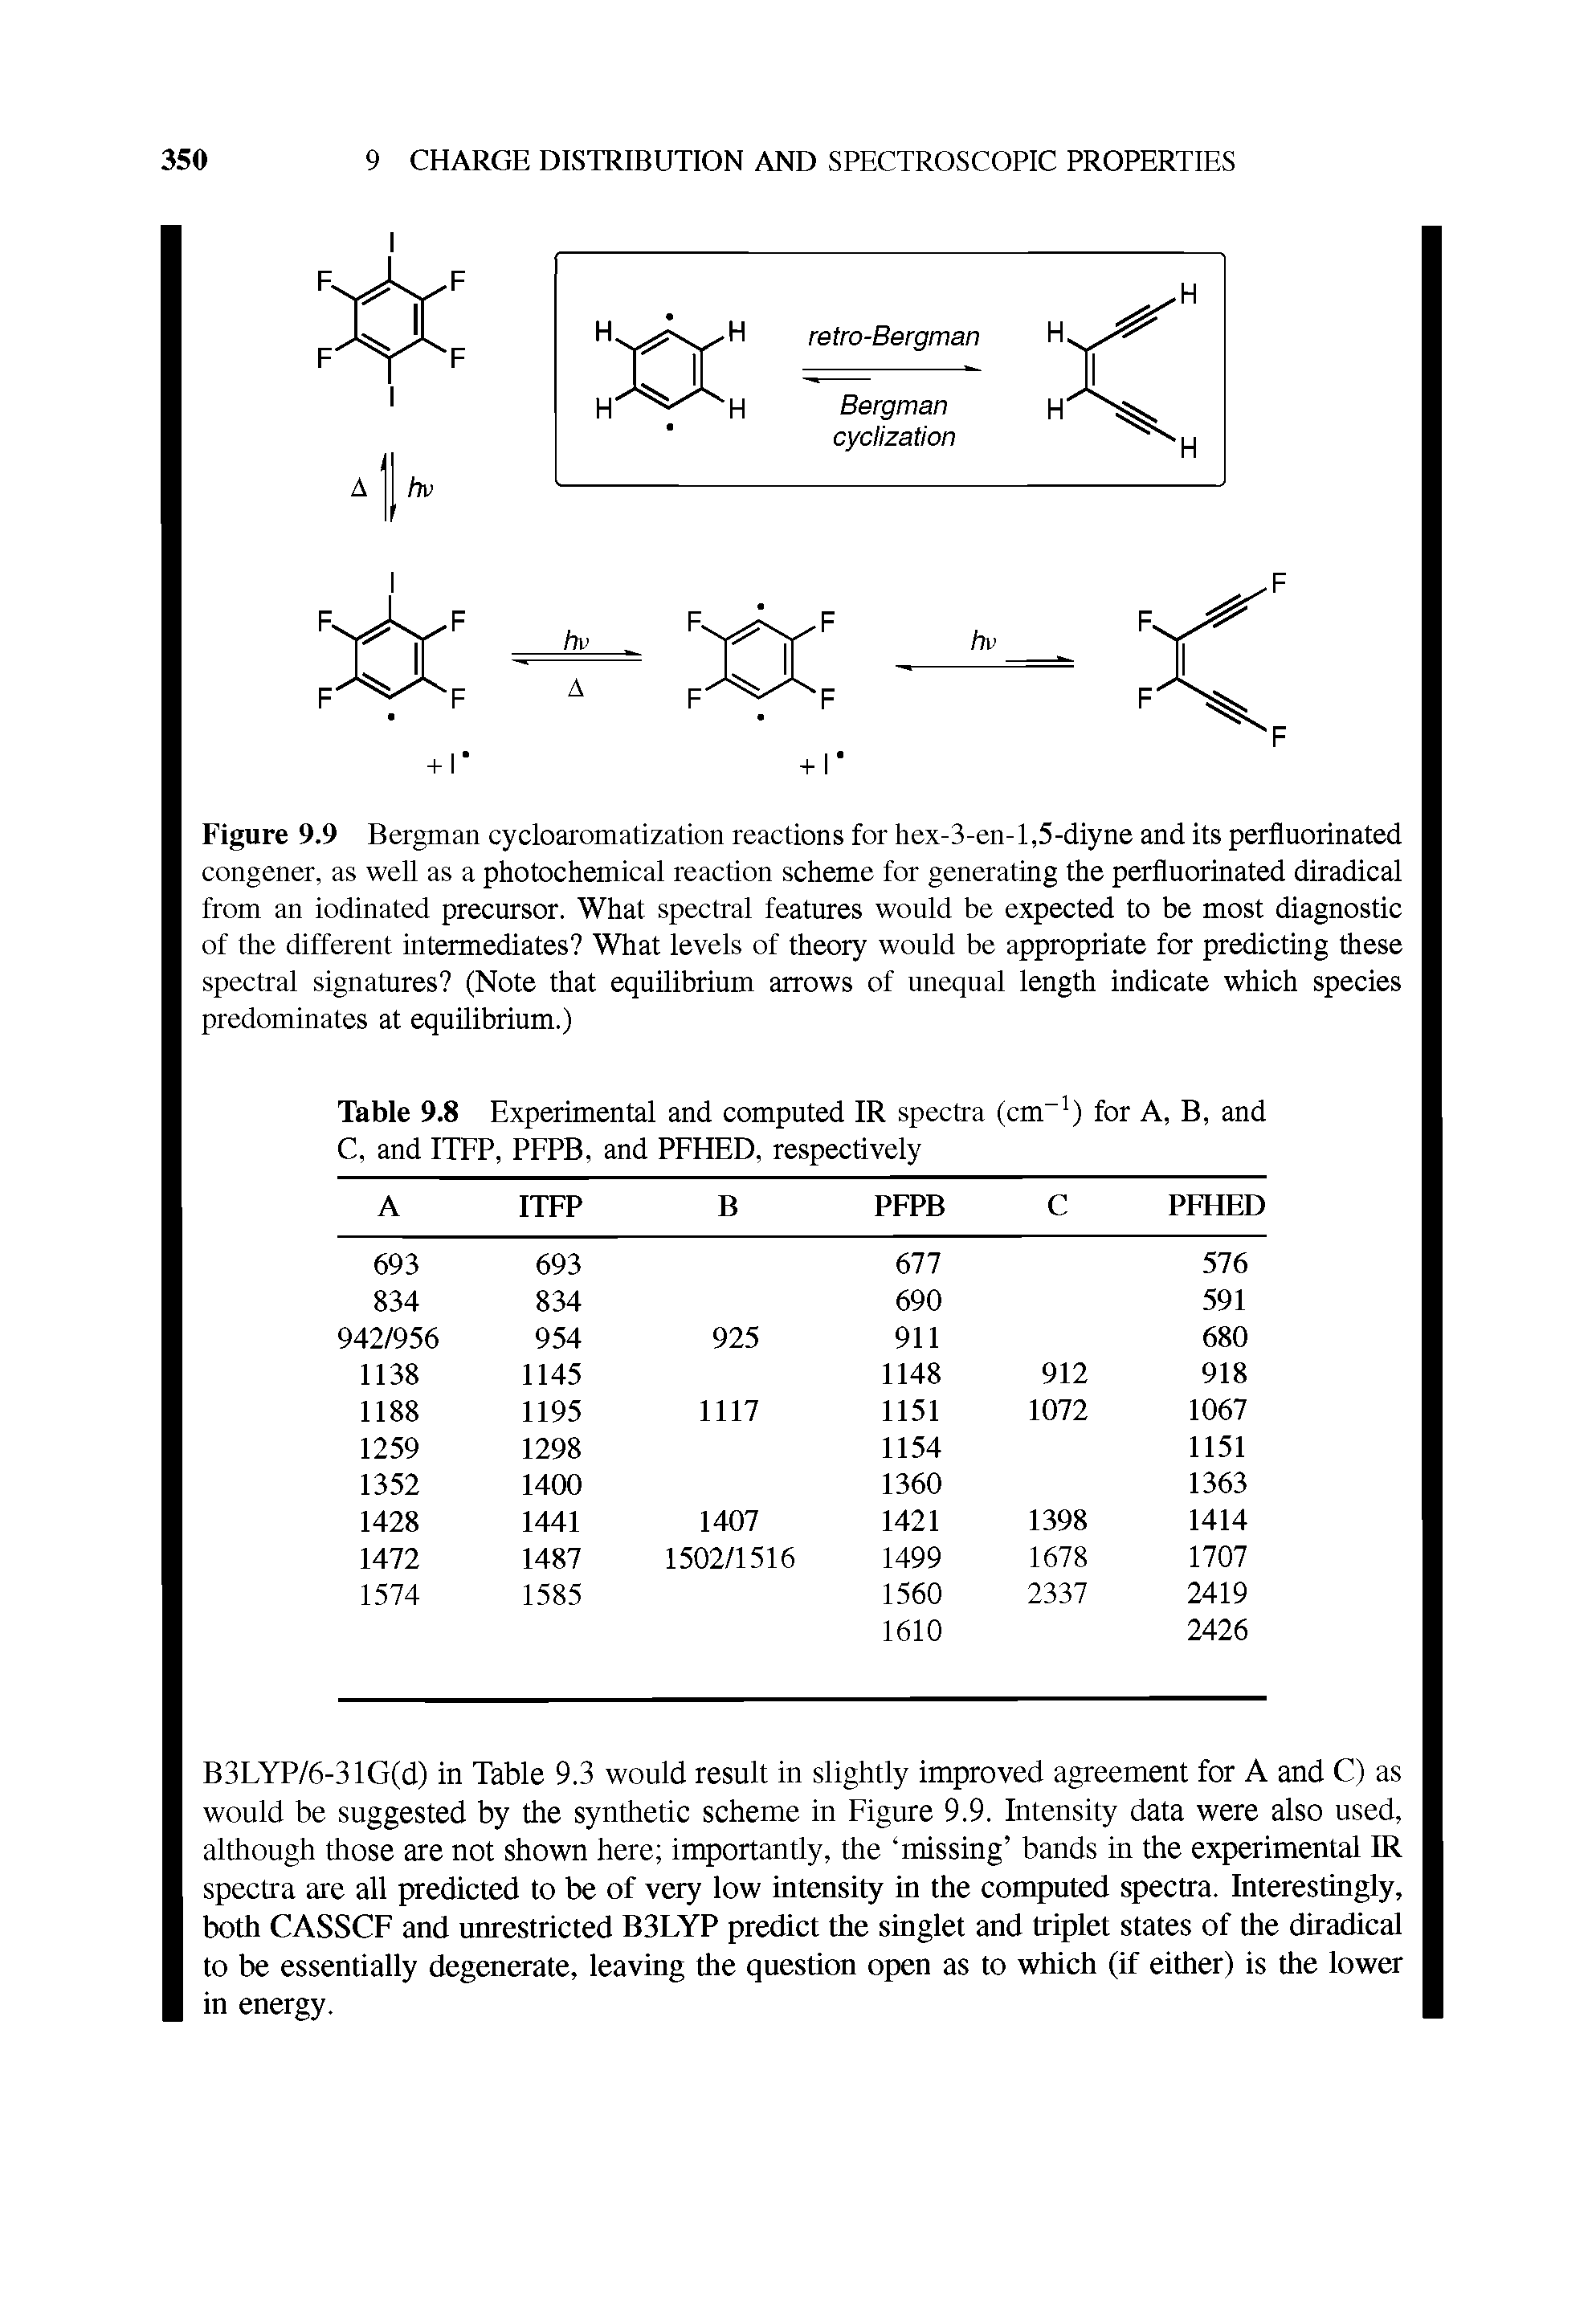 Figure 9.9 Bergman cycloaromatization reactions for ltex-3-ett-l,5-diyne and its perfluorinated congener, as well as a photochemical reaction scheme for generating the perfluorinated diradical from an iodinated precursor. What spectral features would be expected to be most diagnostic of the different intermediates What levels of theory would be appropriate for predicting these spectral signatures (Note that equilibrium arrows of unequal length indicate which species predominates at equilibrium.)...